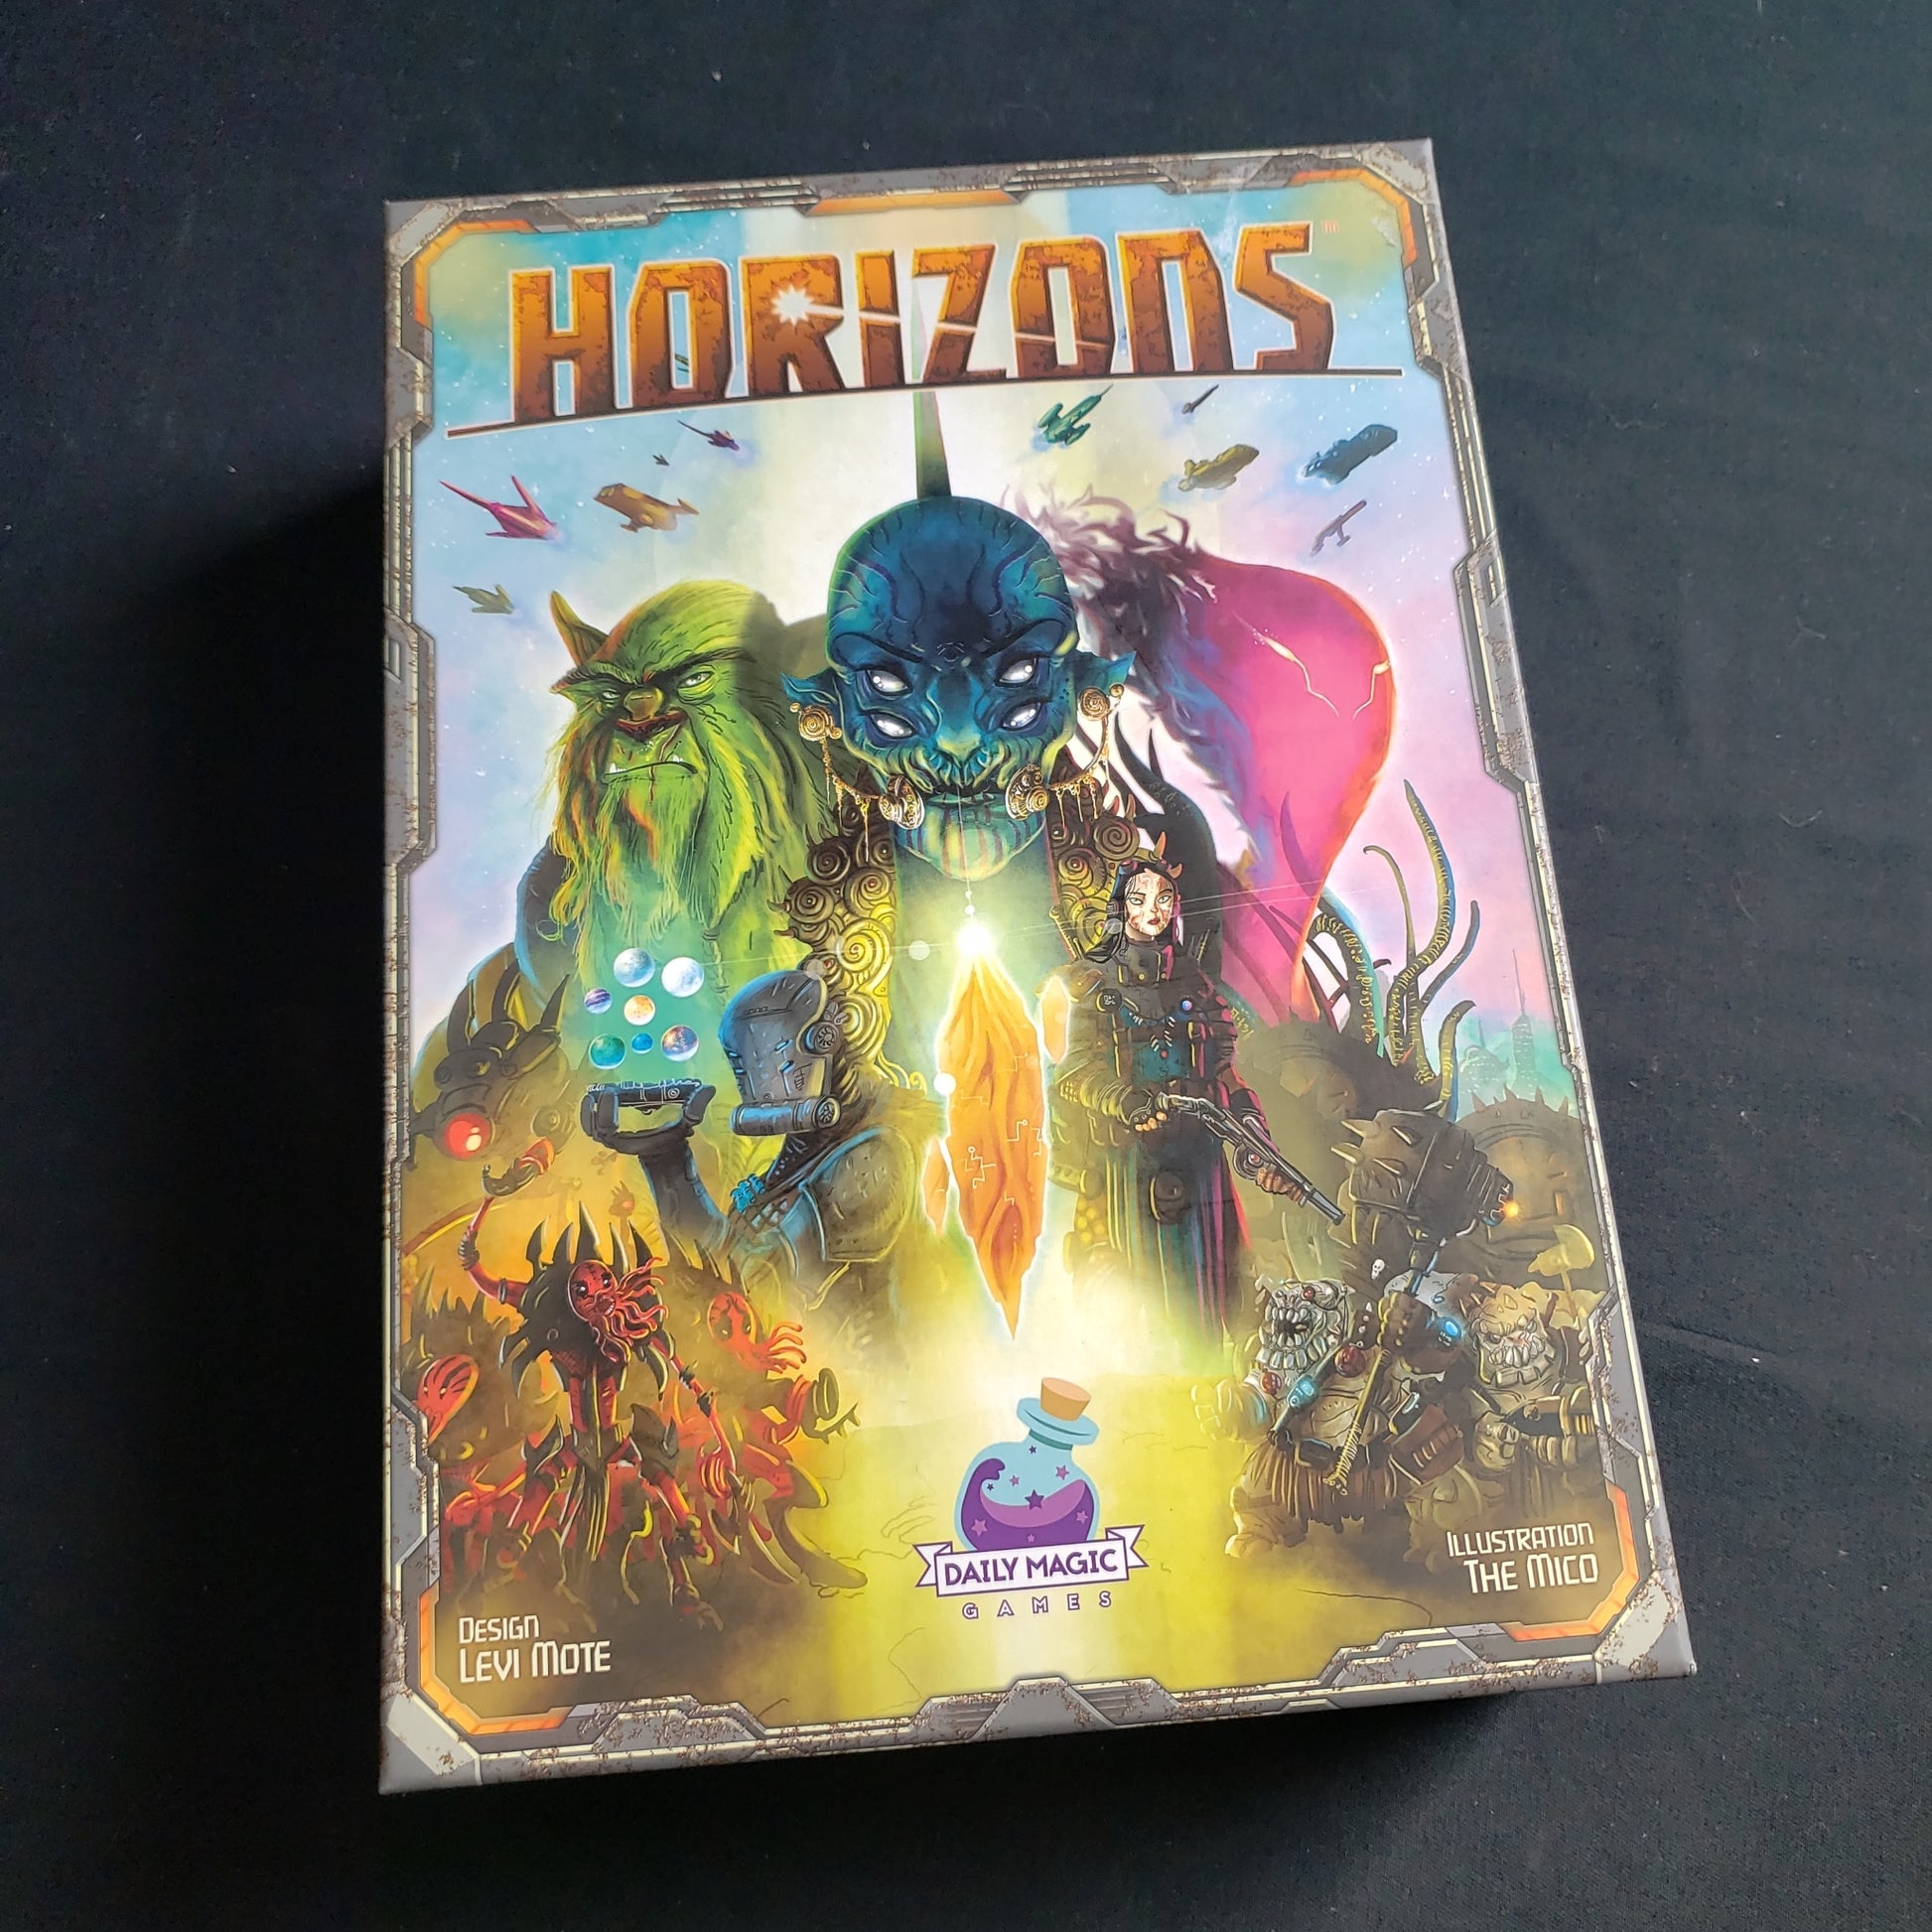 Image shows the front cover of the box of the Horizons board game